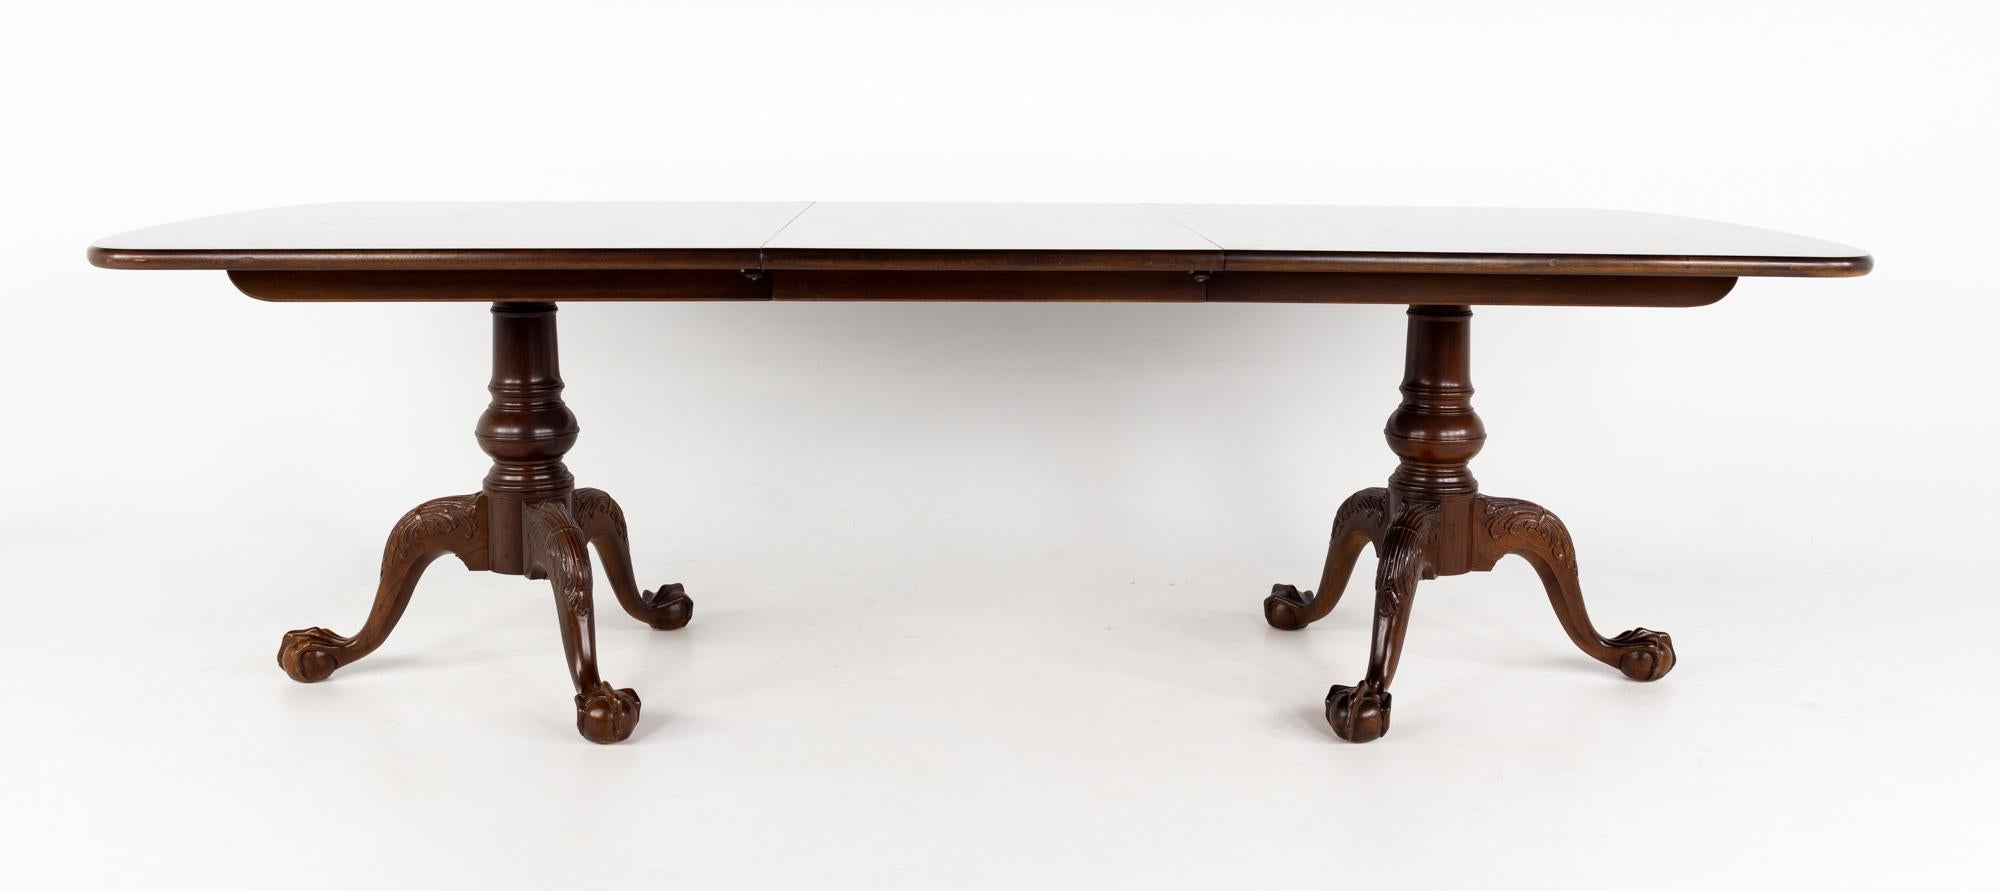 Henredon Aston Court Mahogany Dining Table with 2 Leaves 3